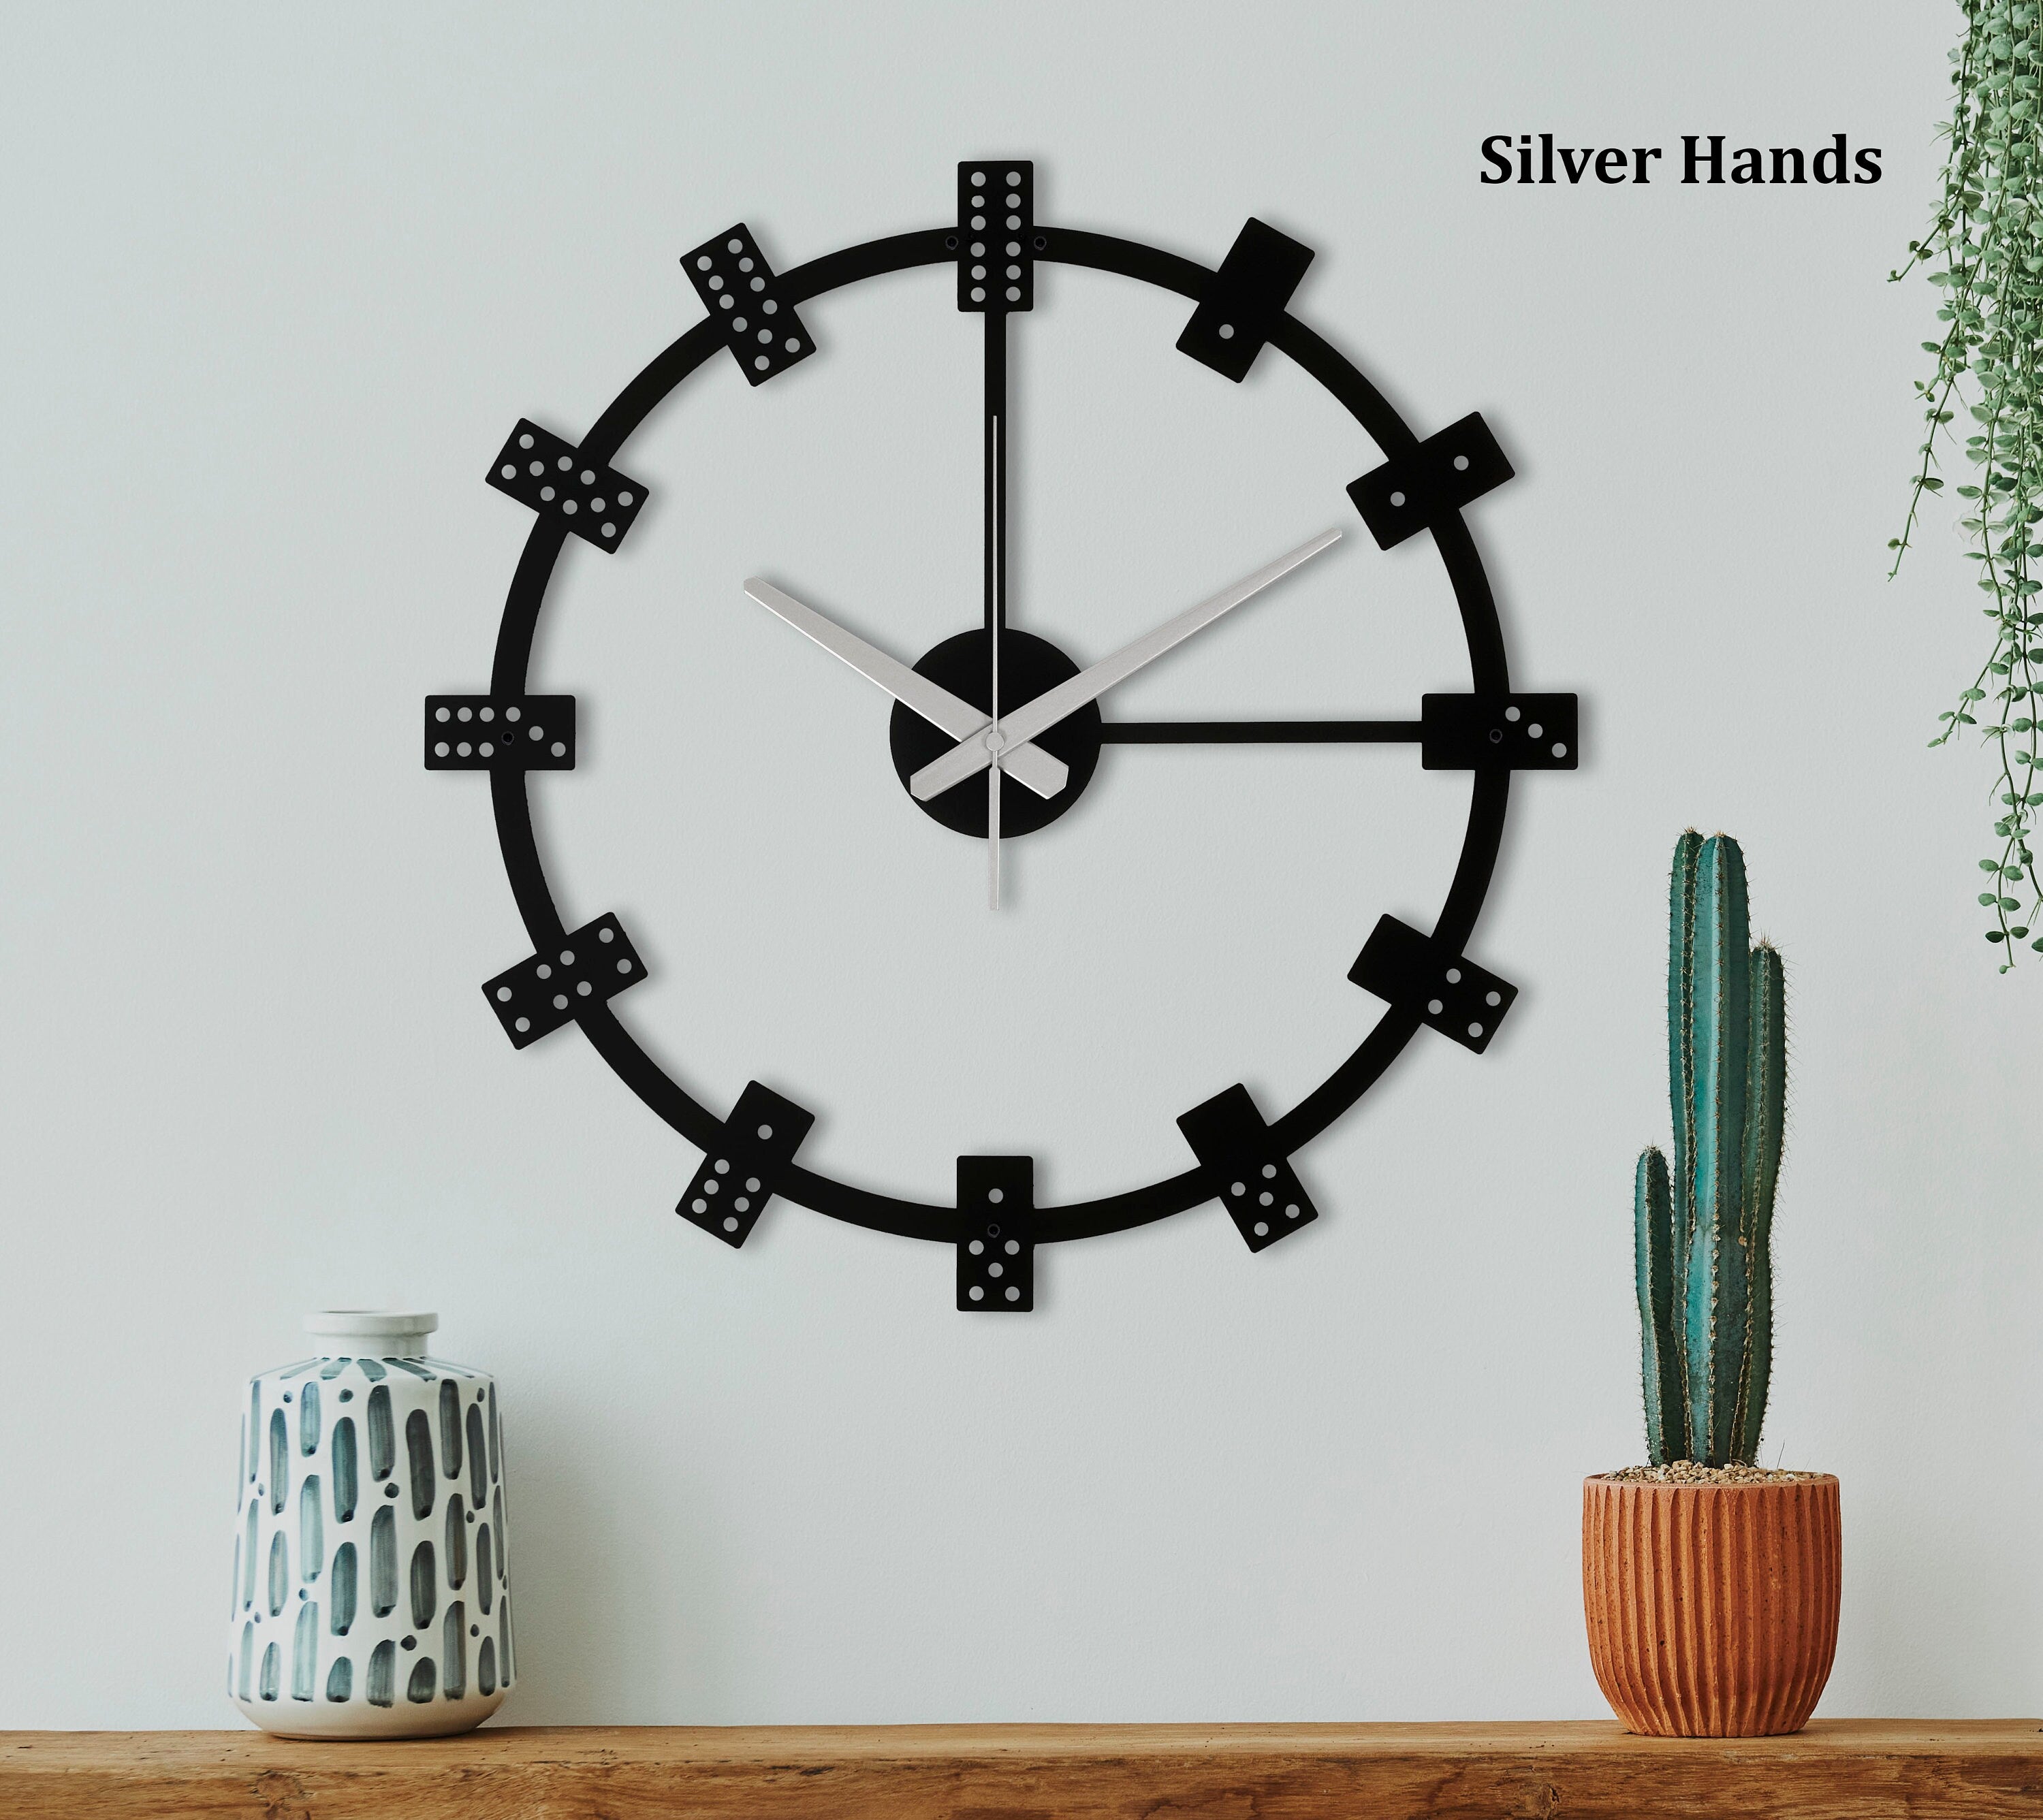 Domino Modern Wall Clock, Metal Wall Clock, Home Decor And Gifts, Unique Wall Clock, Game Room Clock, Oversized Wall Clock, Clocks For Wall